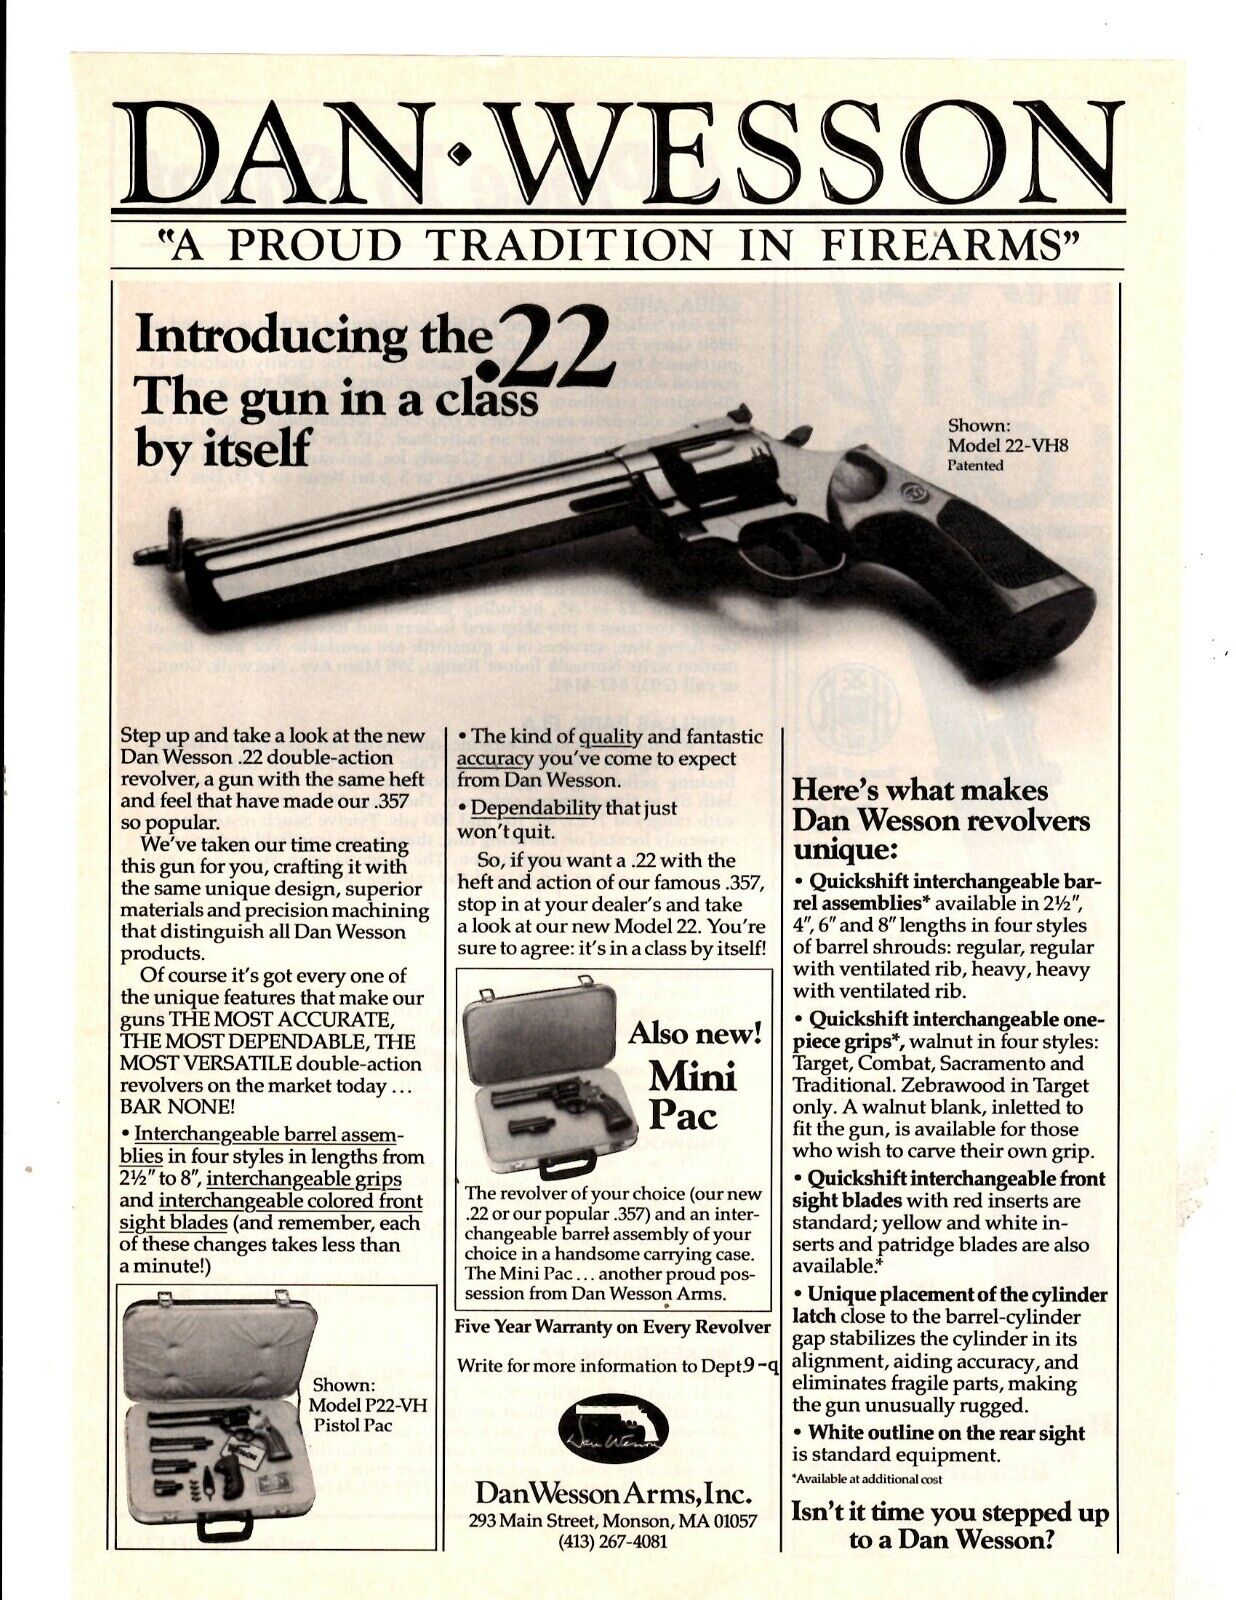 1979 Print Ad  Dan Wesson A Proud Tradion in Firearms Introducing Model 22-VH8